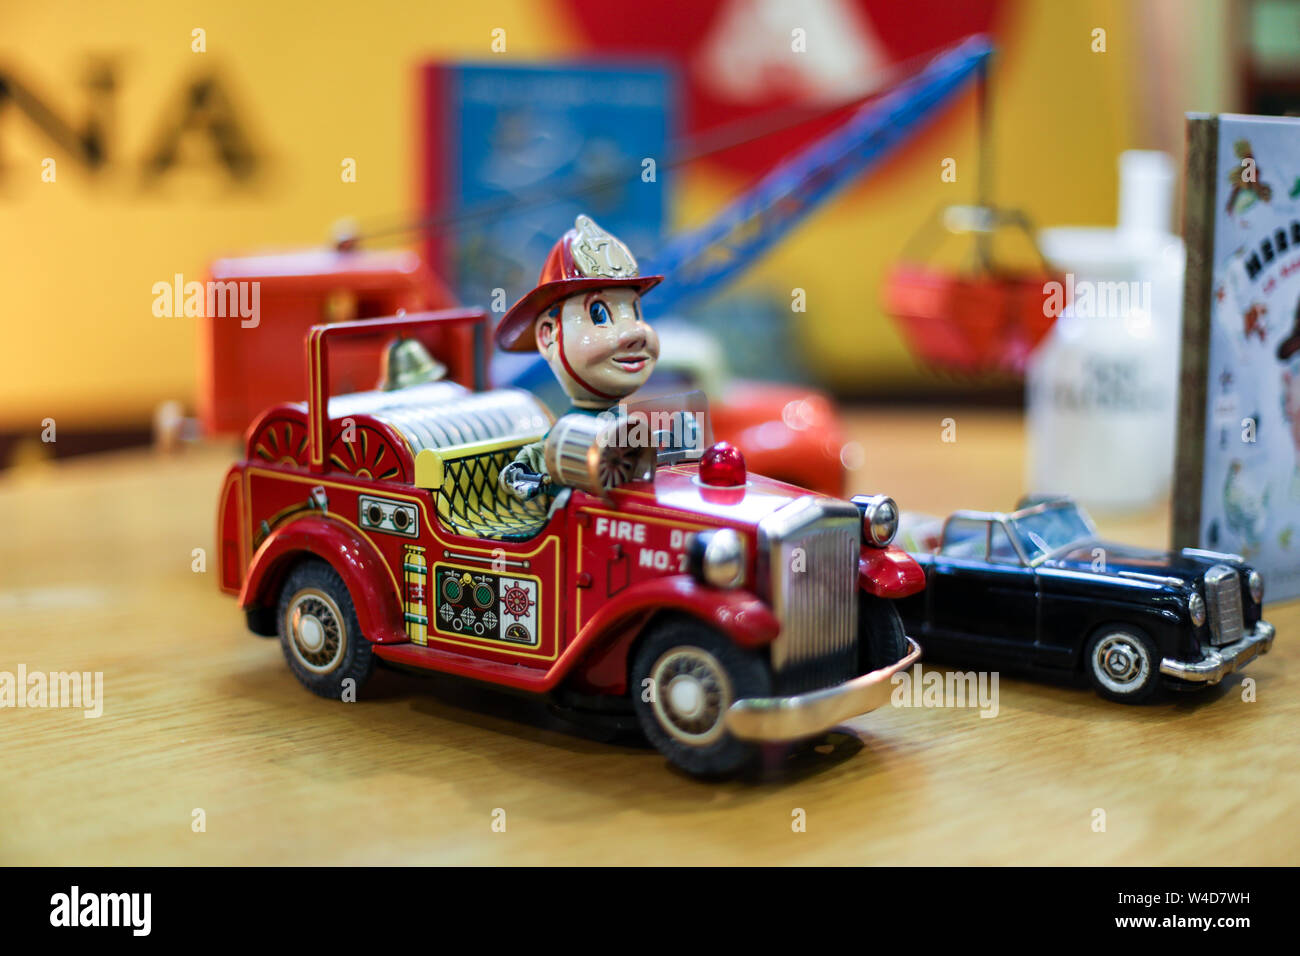 Vintage fire engine toy at Retro and Vintage Design Expo in Helsinki, Finland Stock Photo